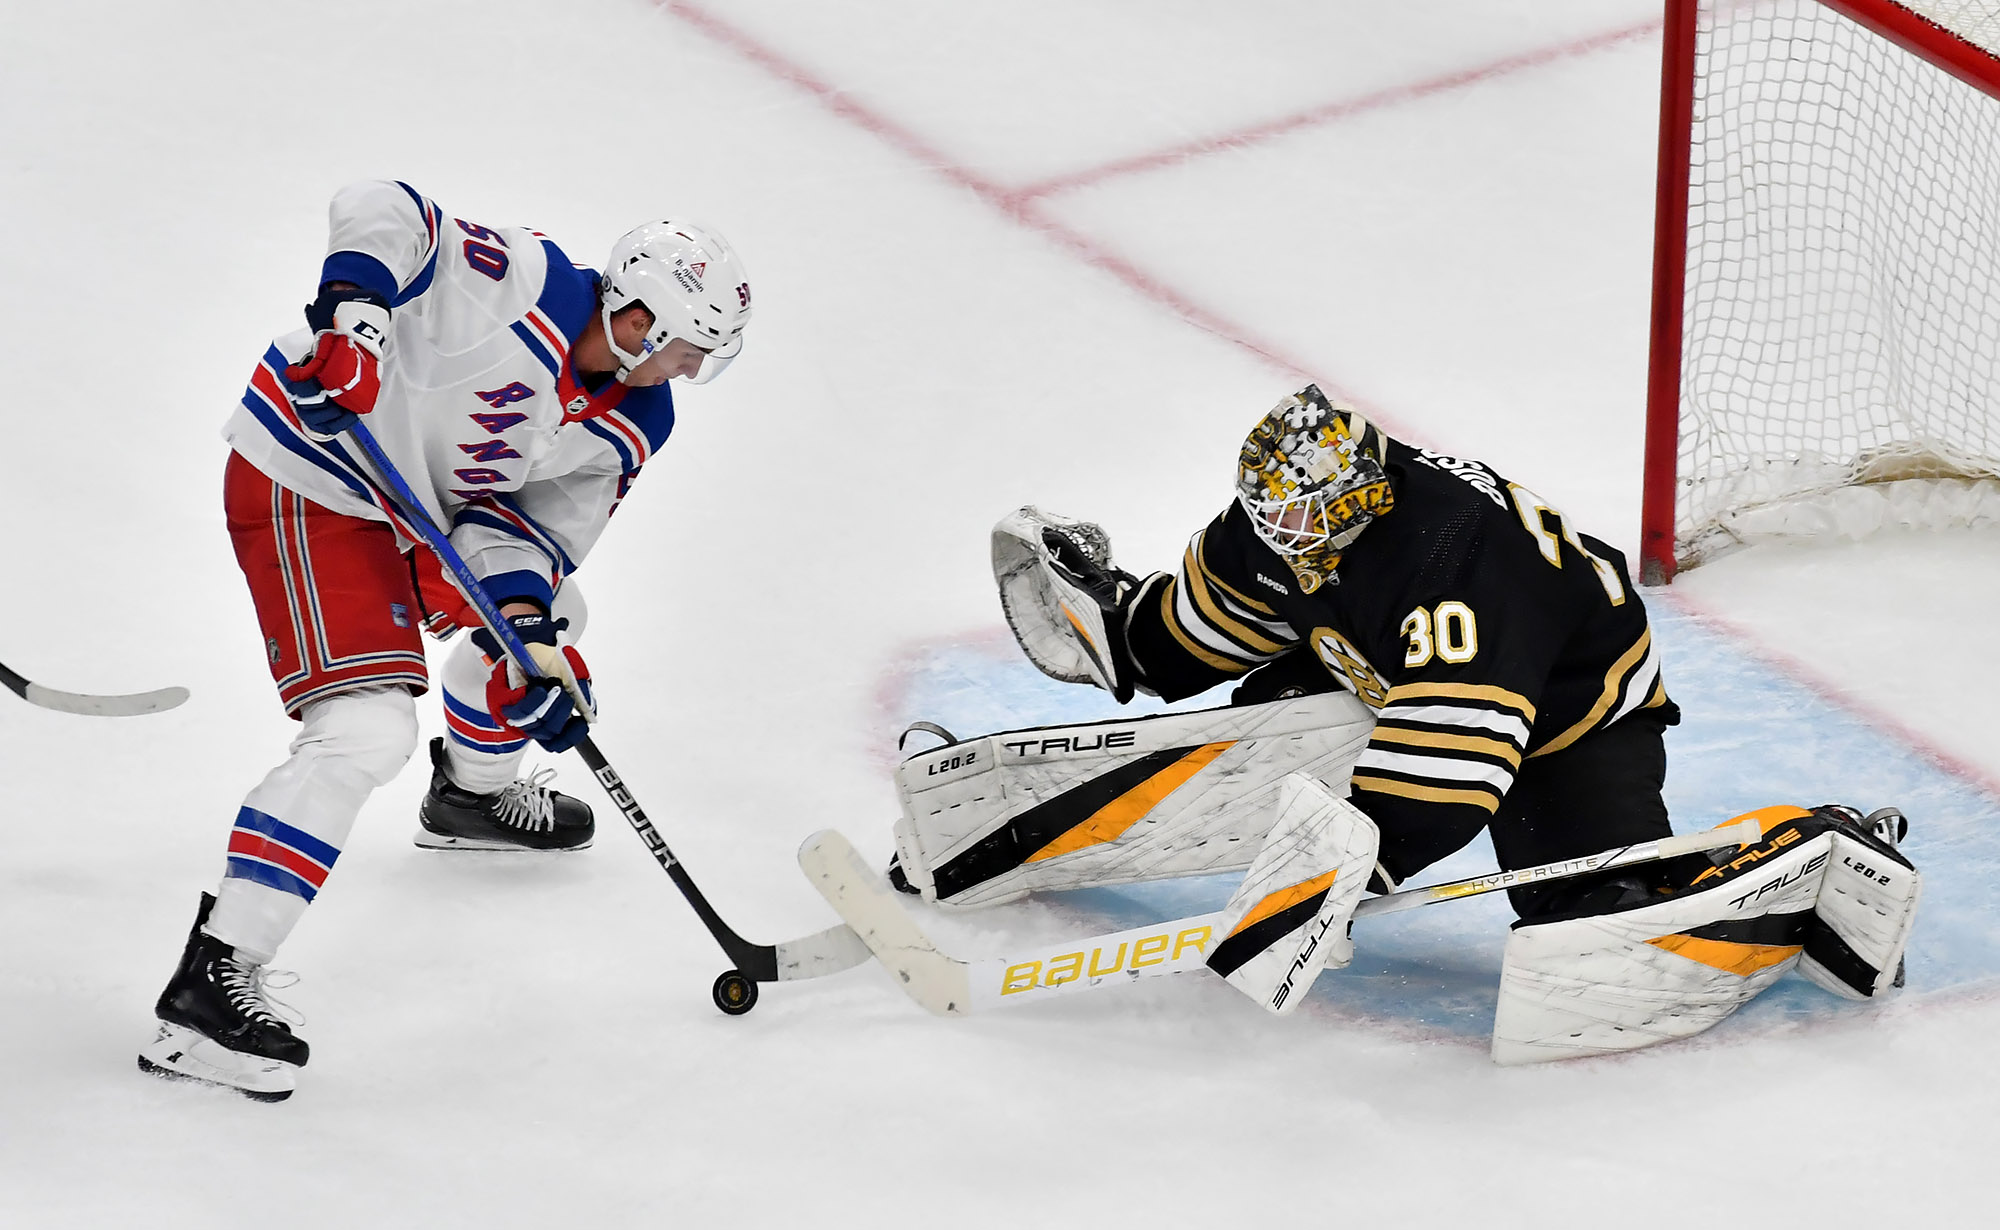 Buffalo Sabres vs. New York Rangers: A Clash of East Division